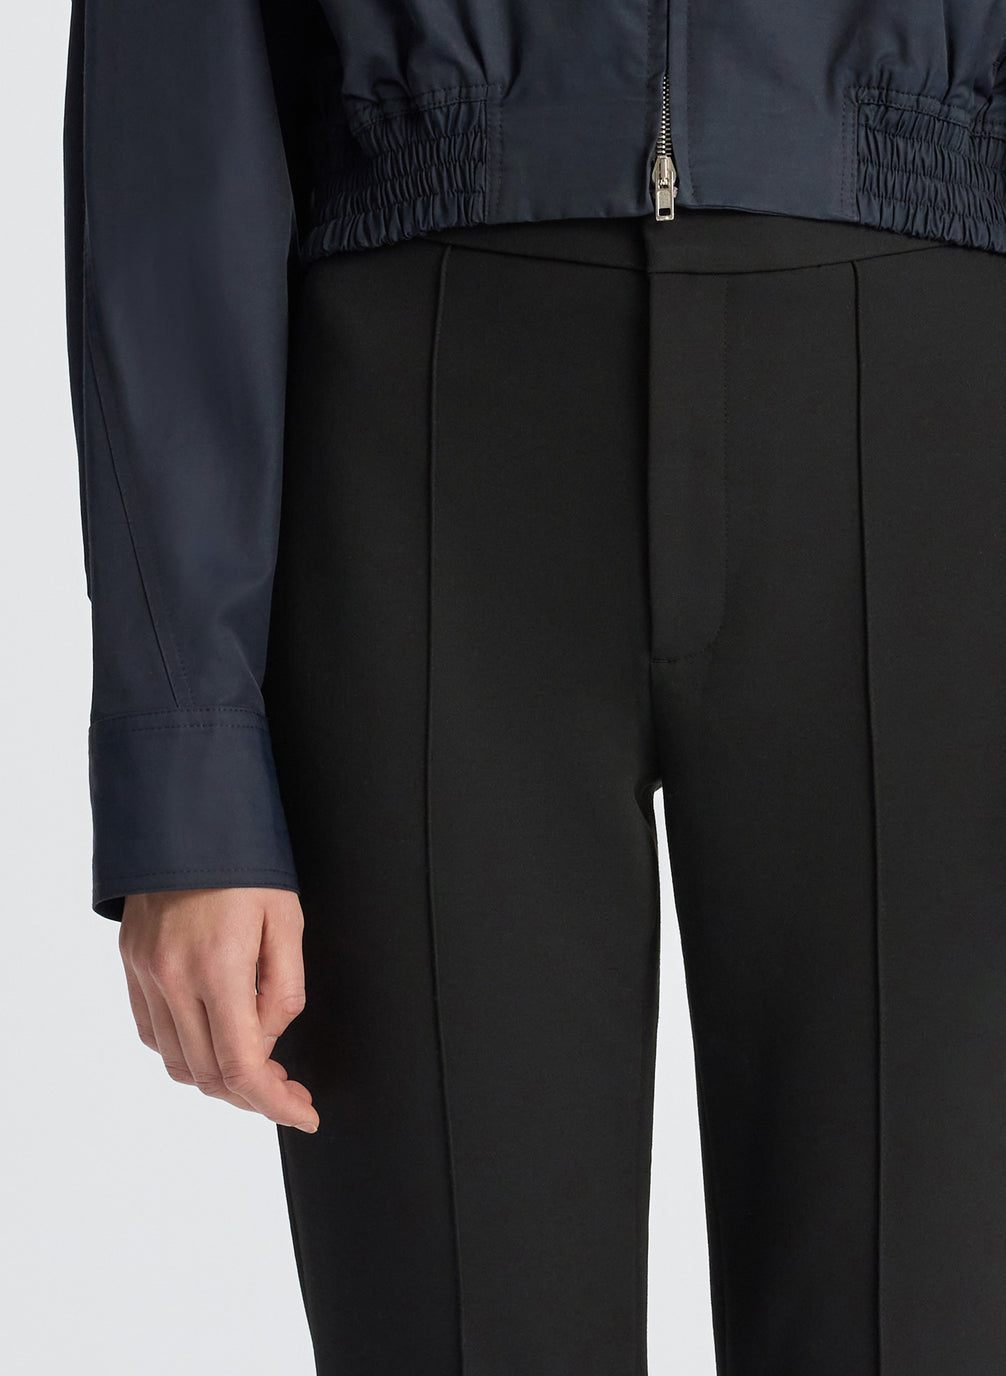 detail  view of woman in navy blue jacket and black ankle pants